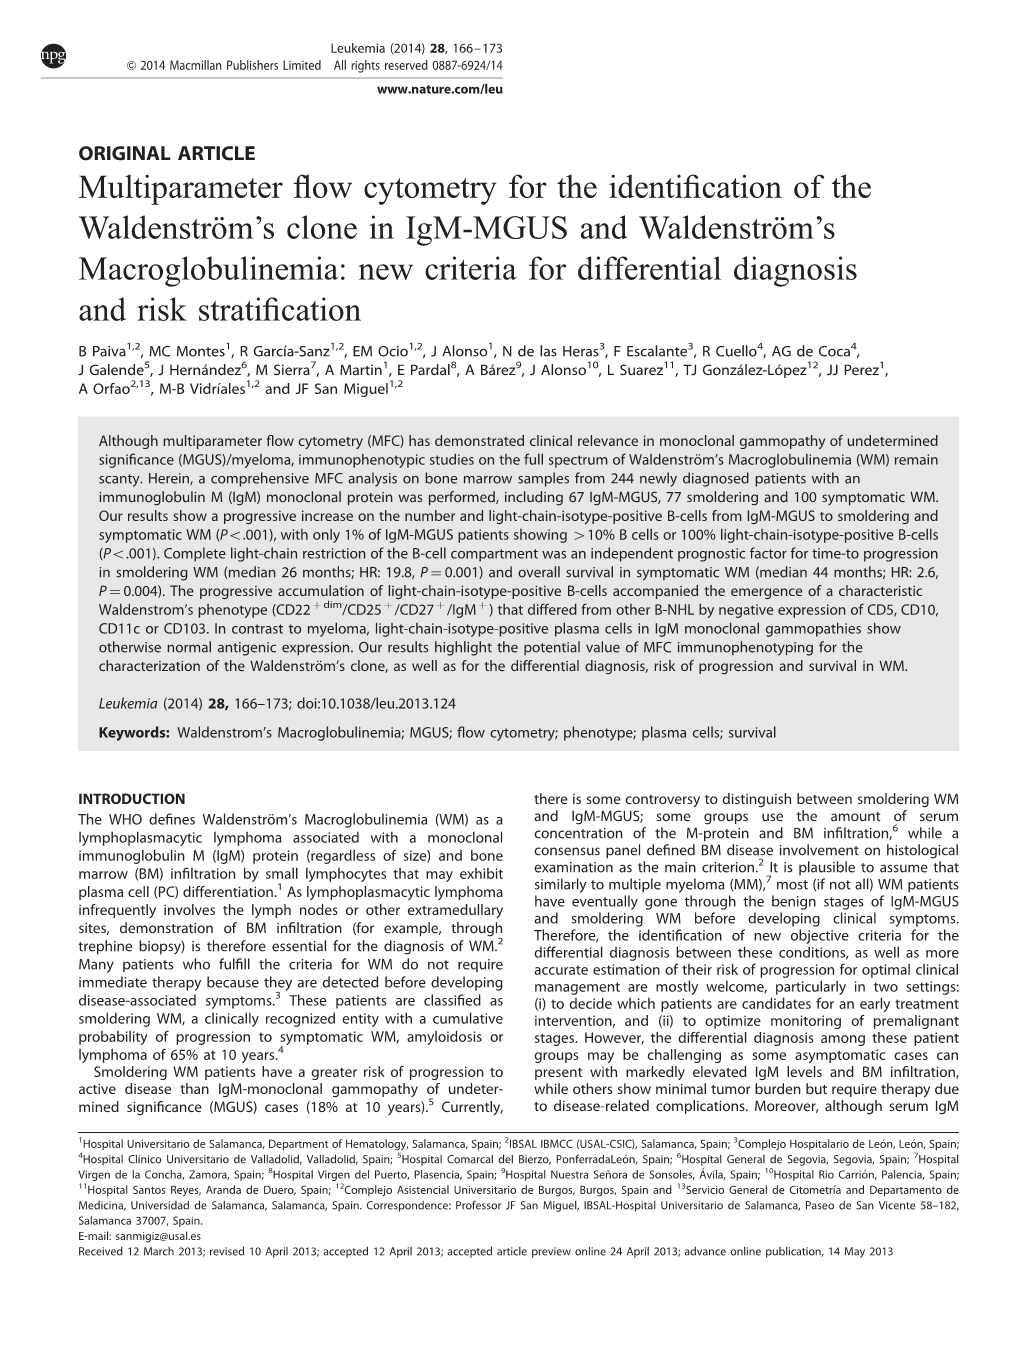 S Clone in Igm-MGUS and Waldenstro¨M’S Macroglobulinemia: New Criteria for Differential Diagnosis and Risk Stratiﬁcation